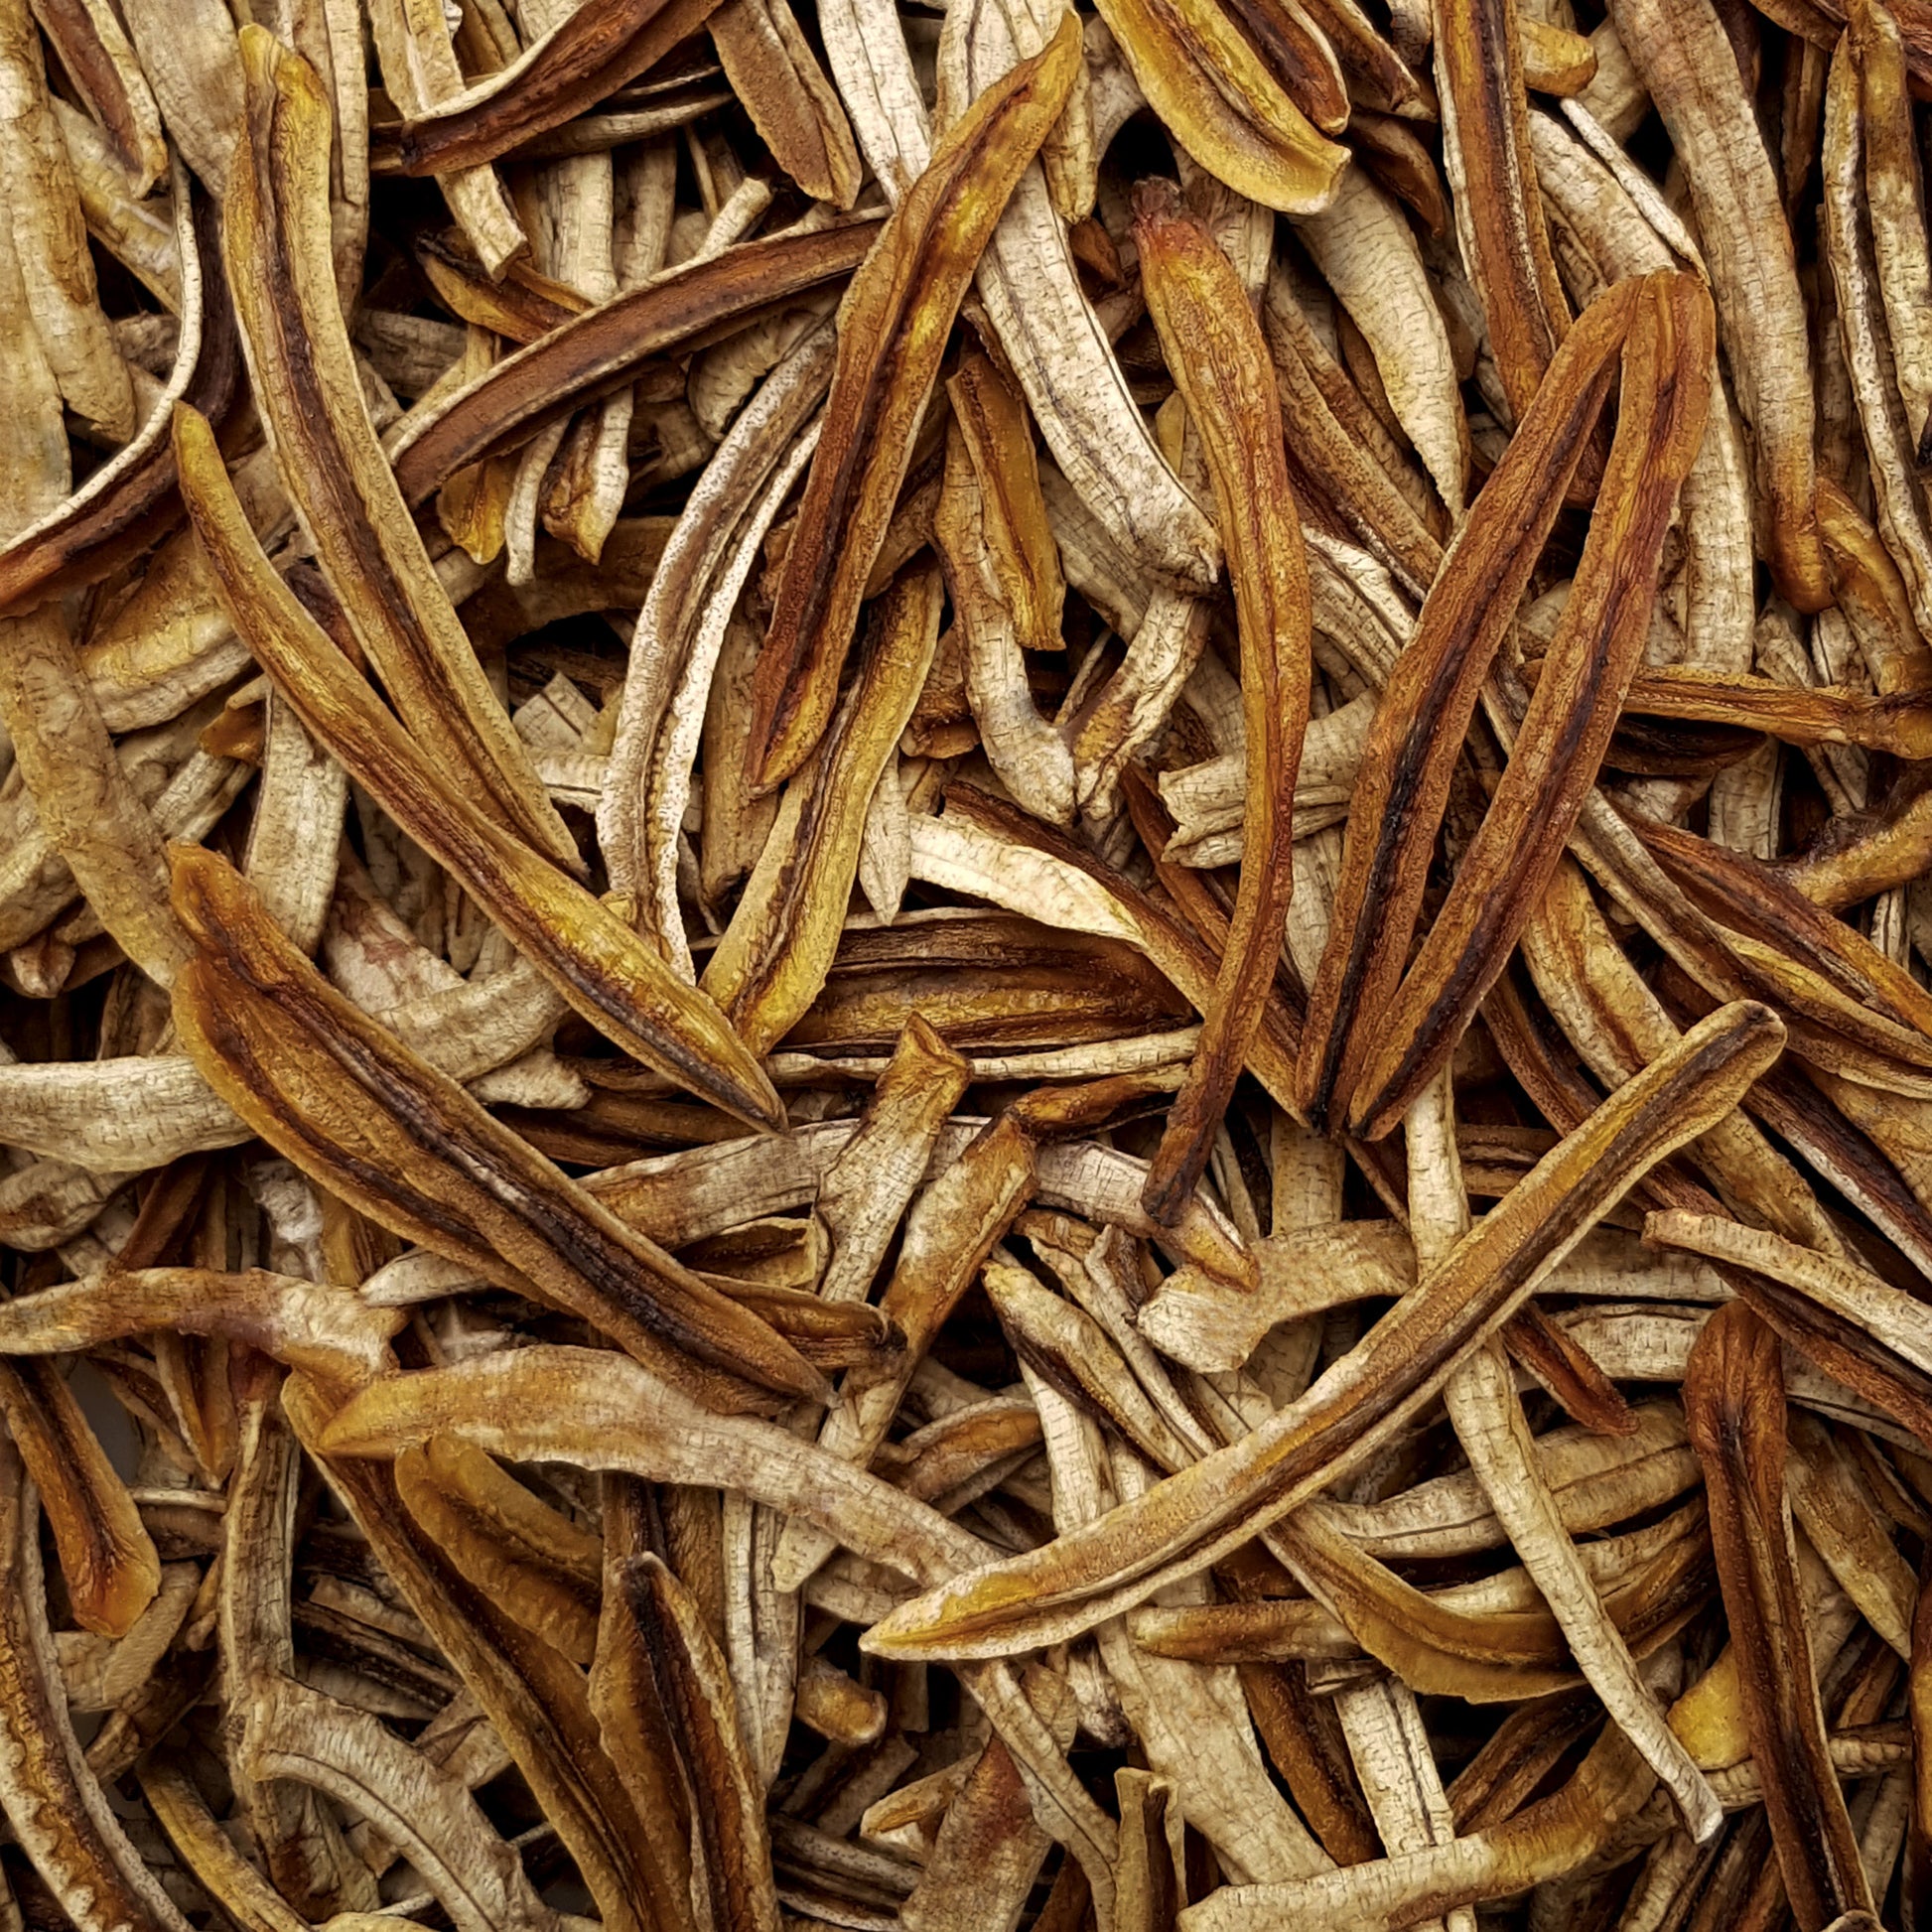 Full frame overhead image of BY NATURE Dried Banana Strips - certified organic at source, preservative-free.